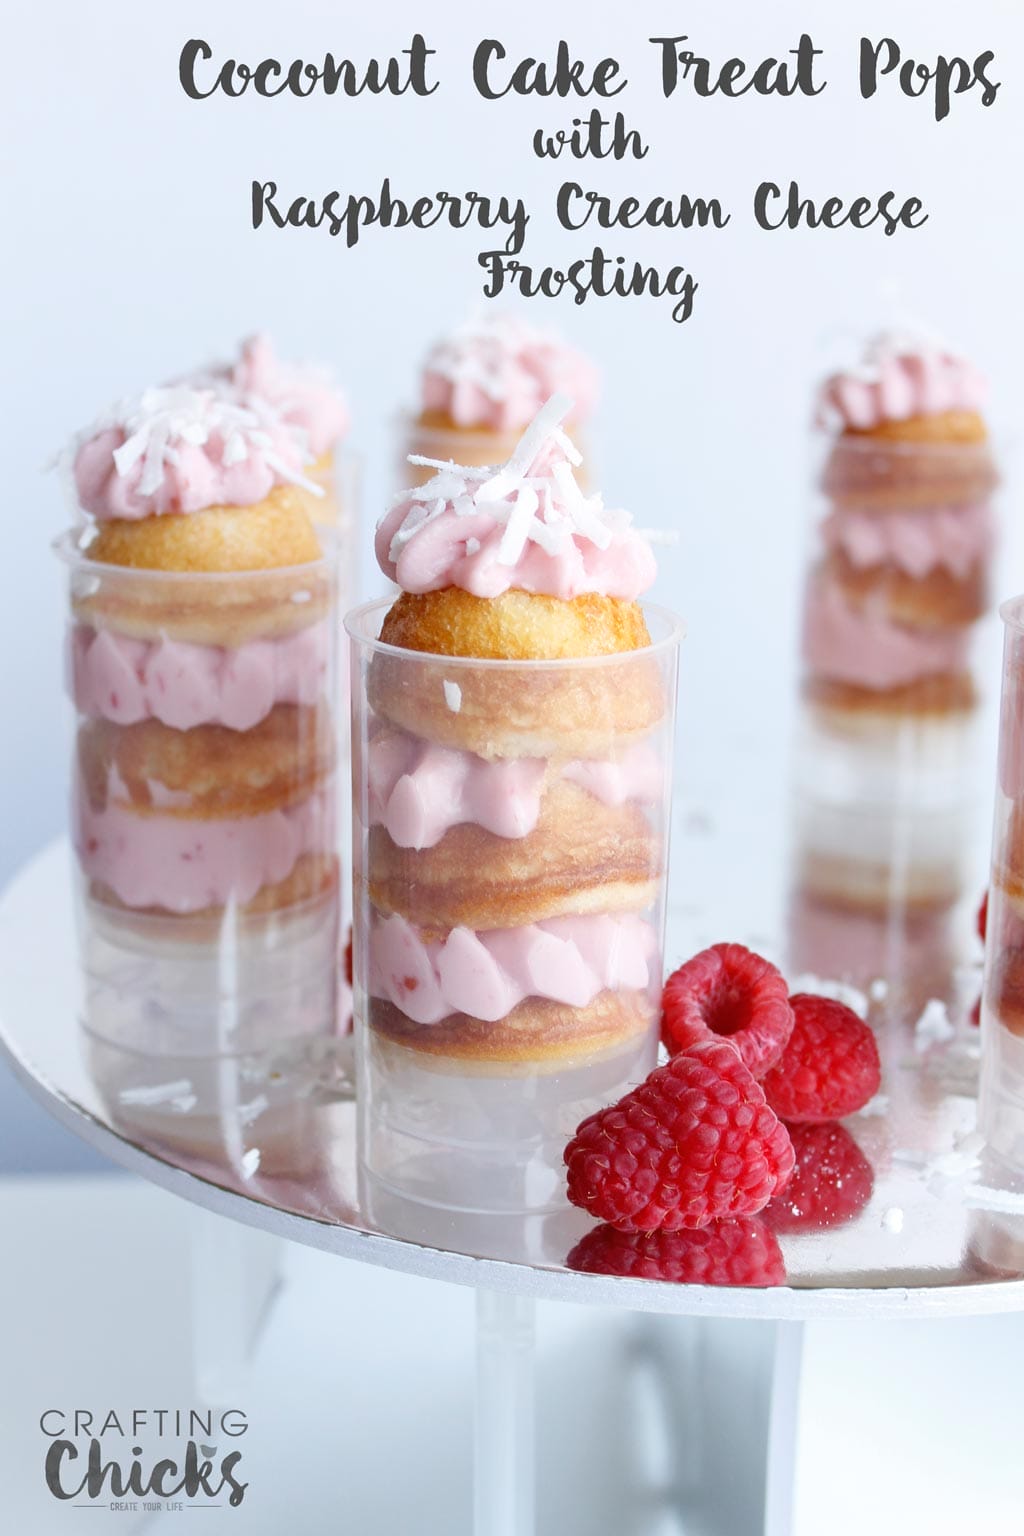 Coconut Cake Treat Pops with Raspberry Cream Cheese Frosting